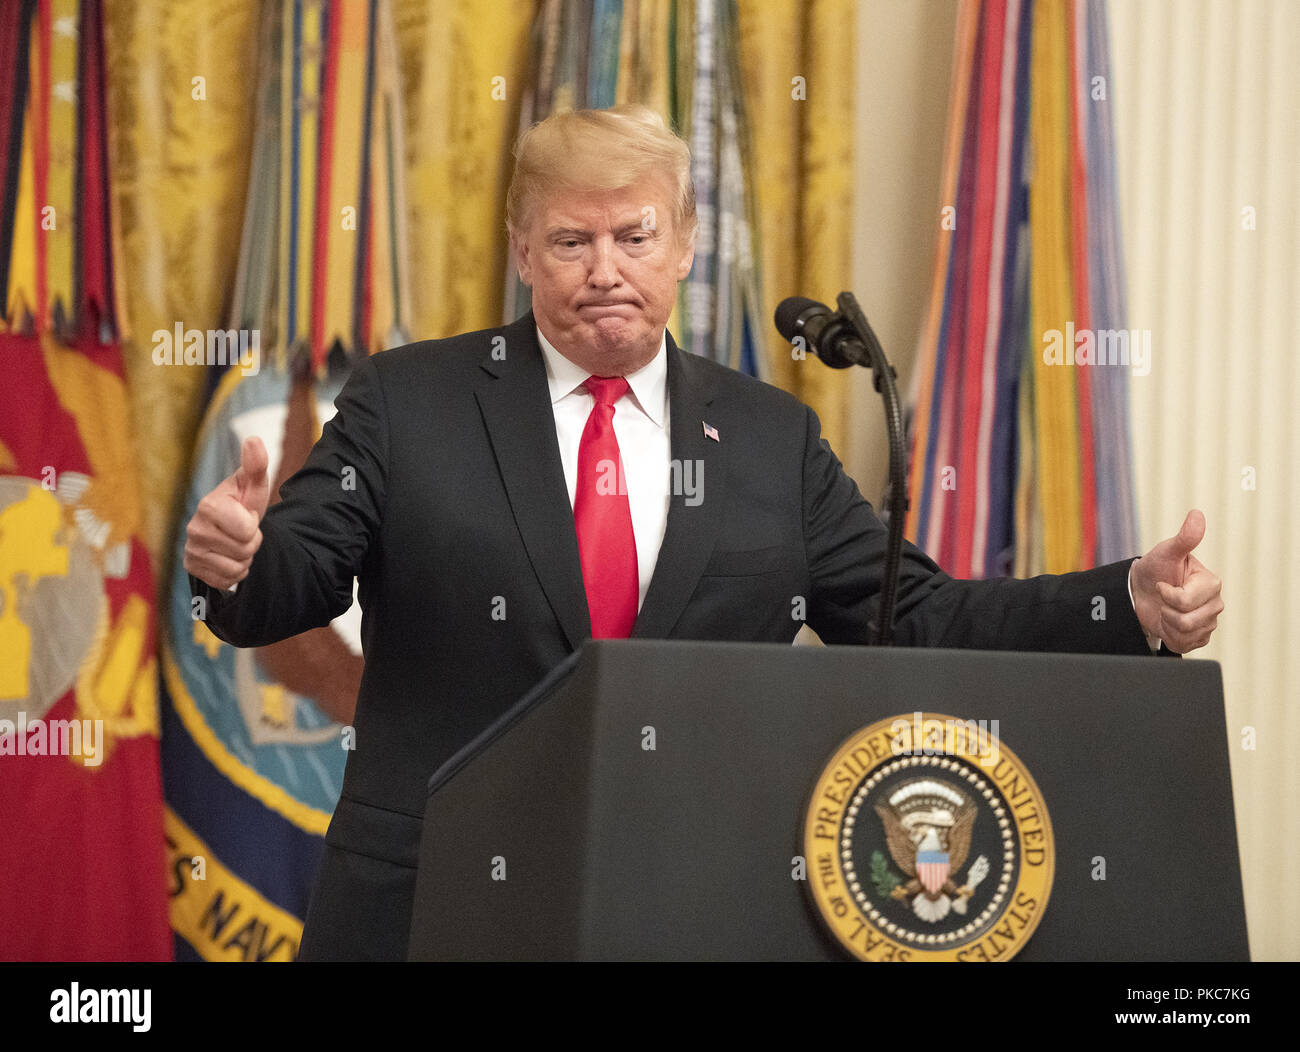 Washington, District of Columbia, USA. 12th Sep, 2018. United States President Donald J. Trump concludes his remarks at the Congressional Medal of Honor Society Reception in the East Room of the White House in Washington, DC on Wednesday, September 12, 2018 Credit: Ron Sachs/CNP/ZUMA Wire/Alamy Live News Stock Photo